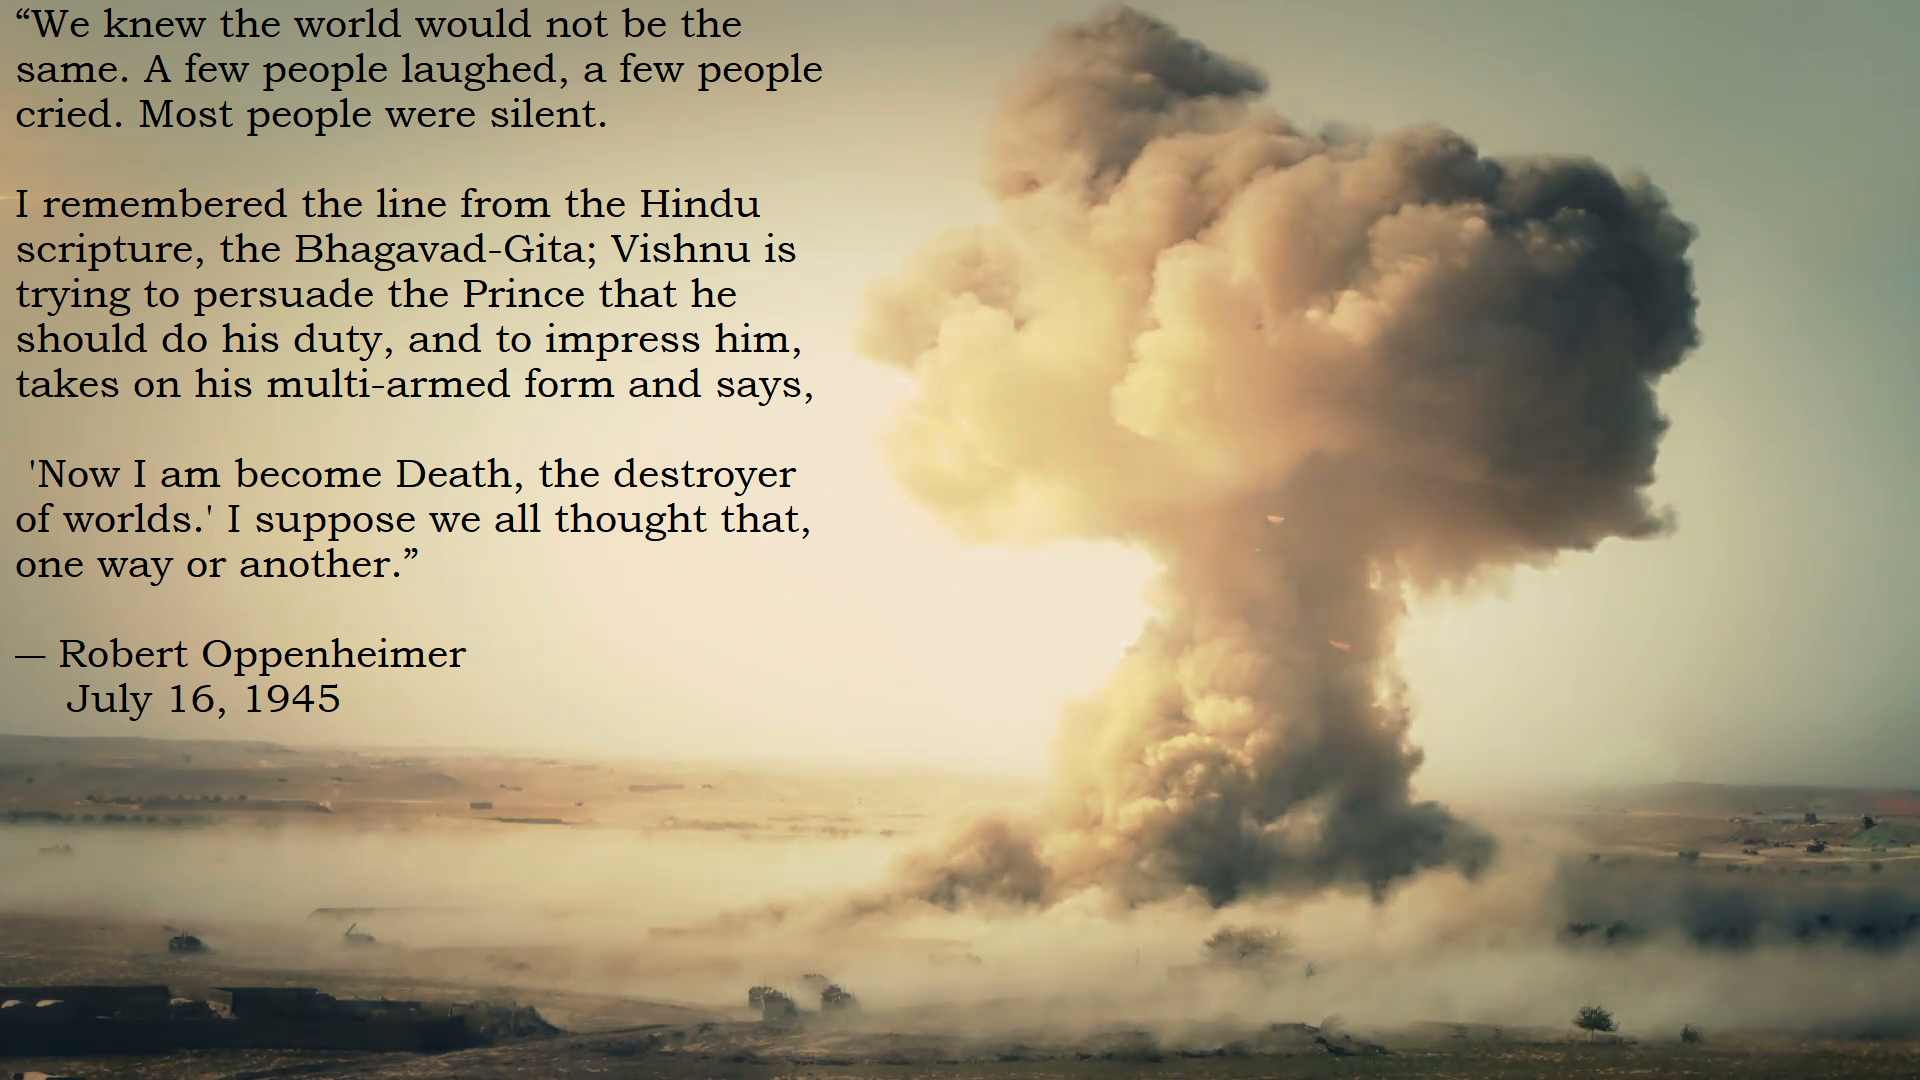 We knew the world would not be the same. Oppenheimer [1920x1080] [OC]